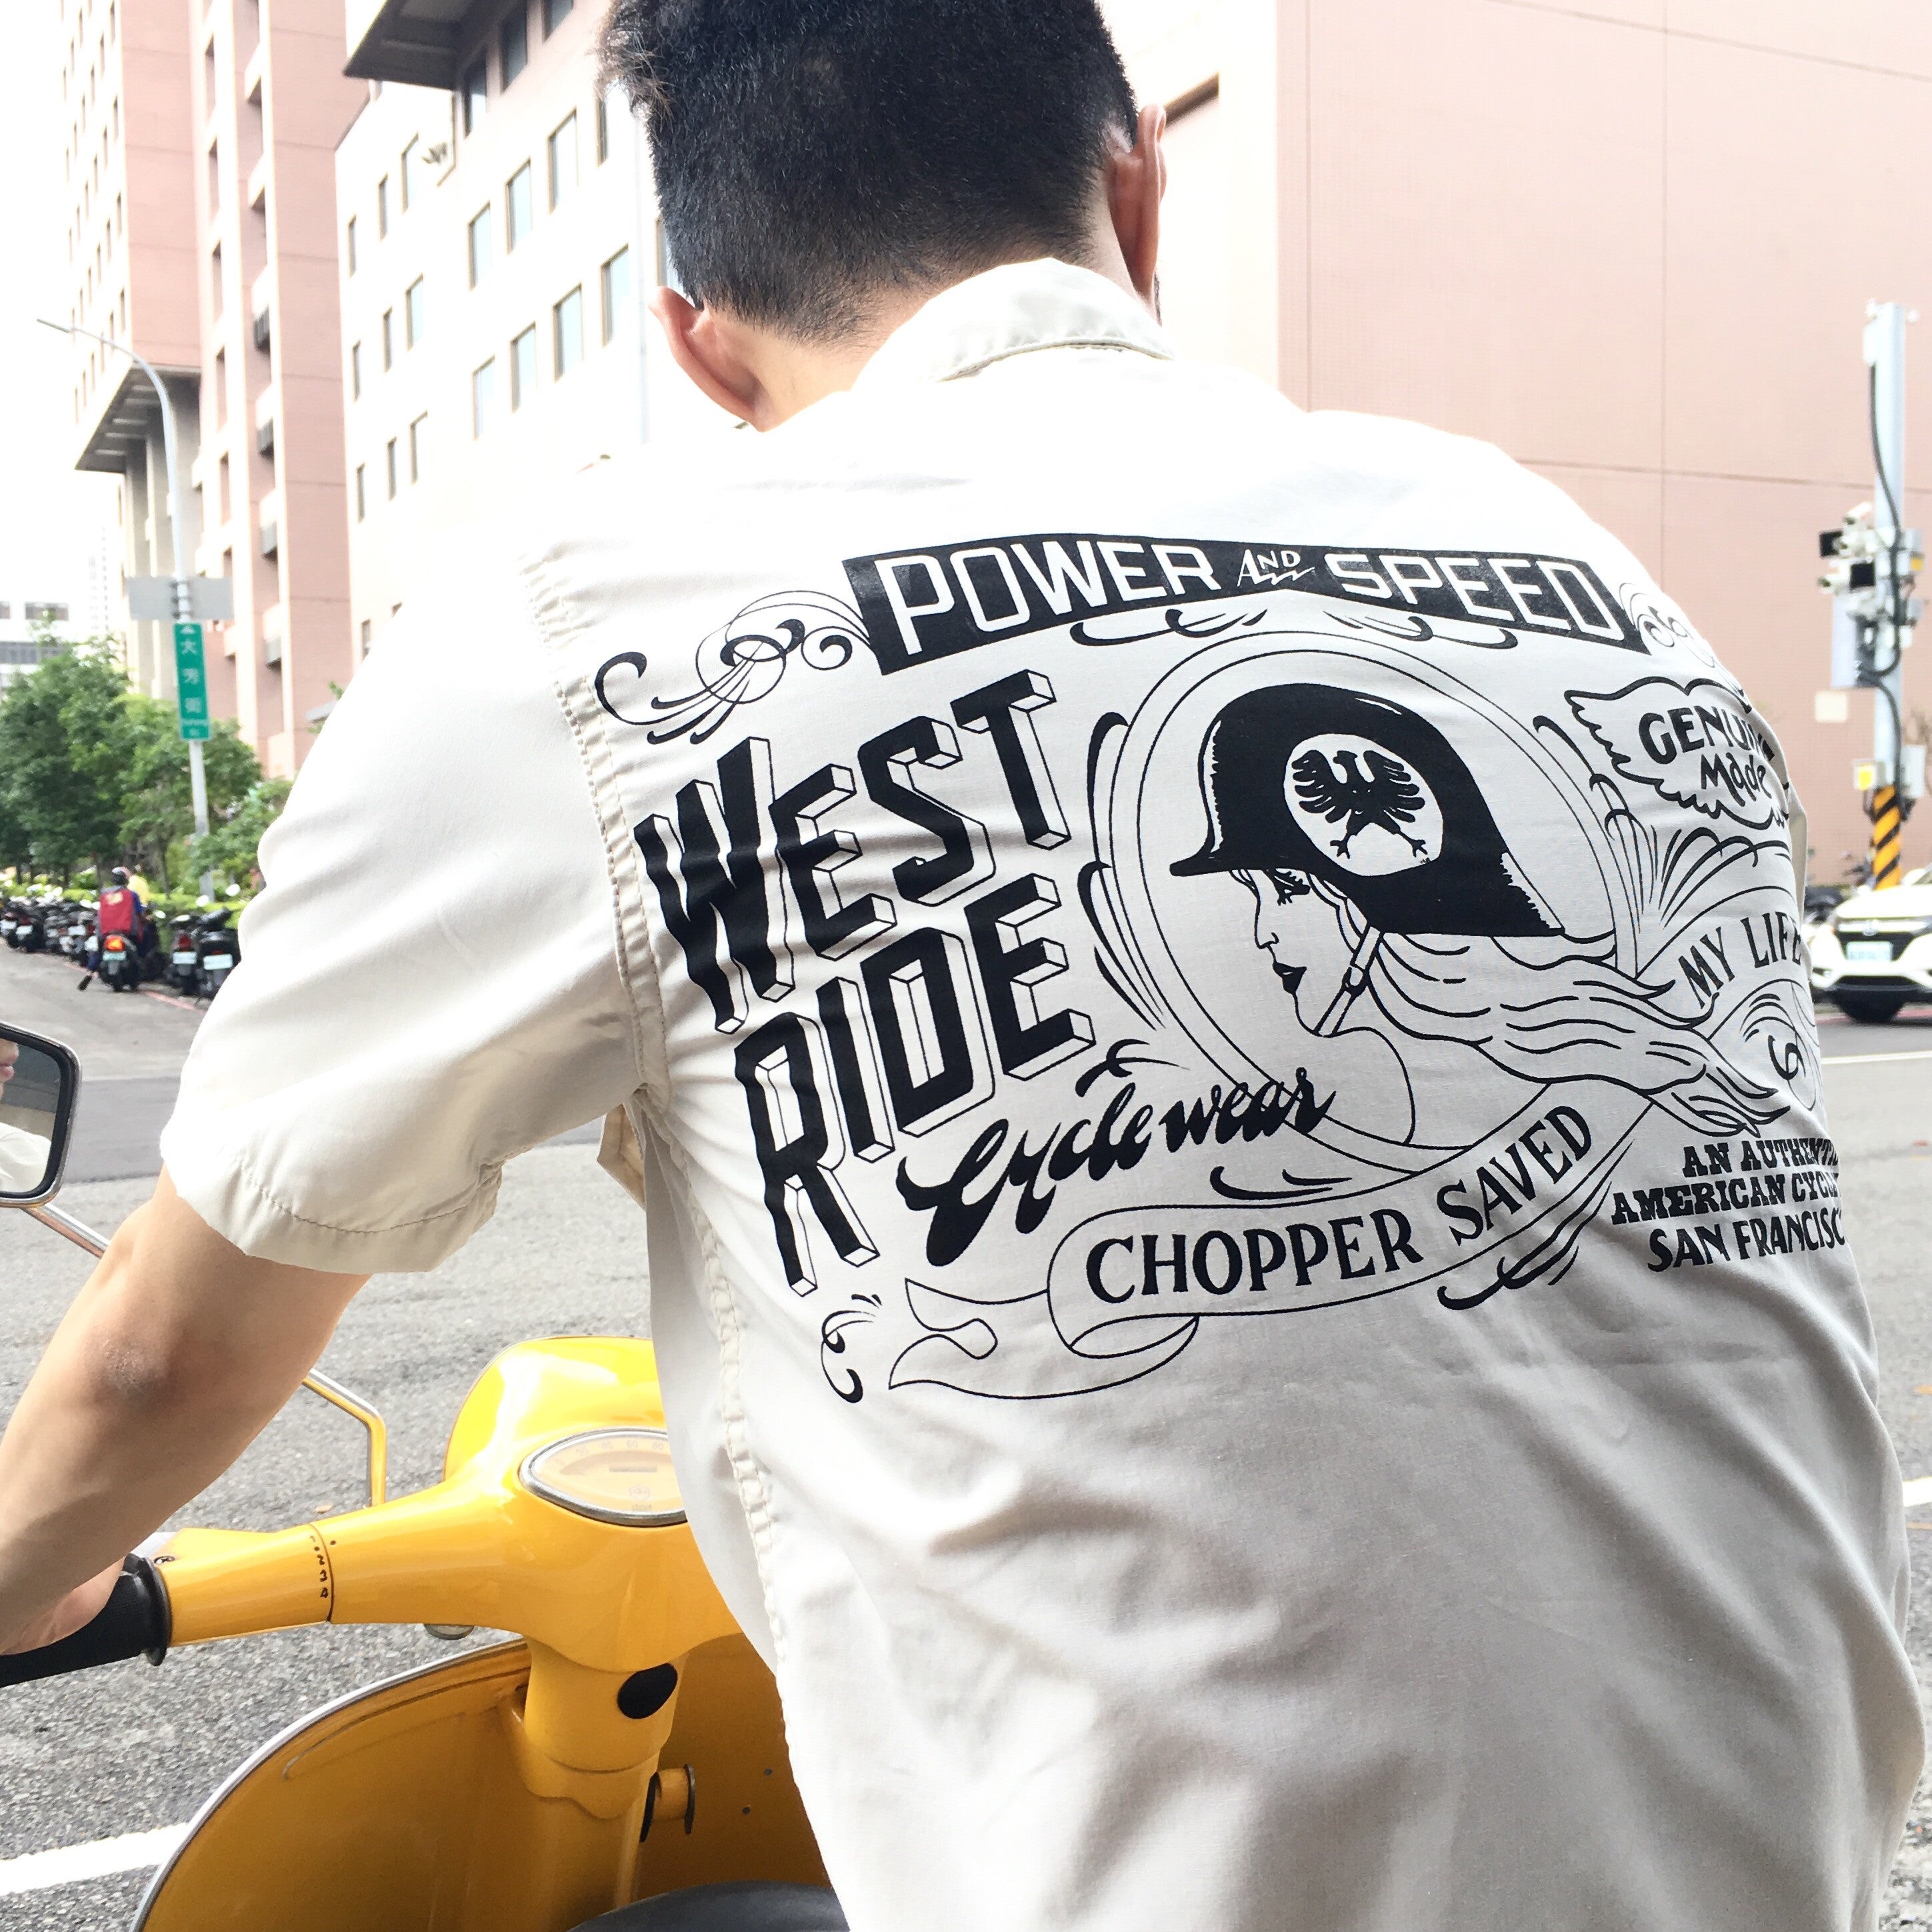 May club -【WESTRIDE】SNAP WORK S/S SHIRTS - WHITE